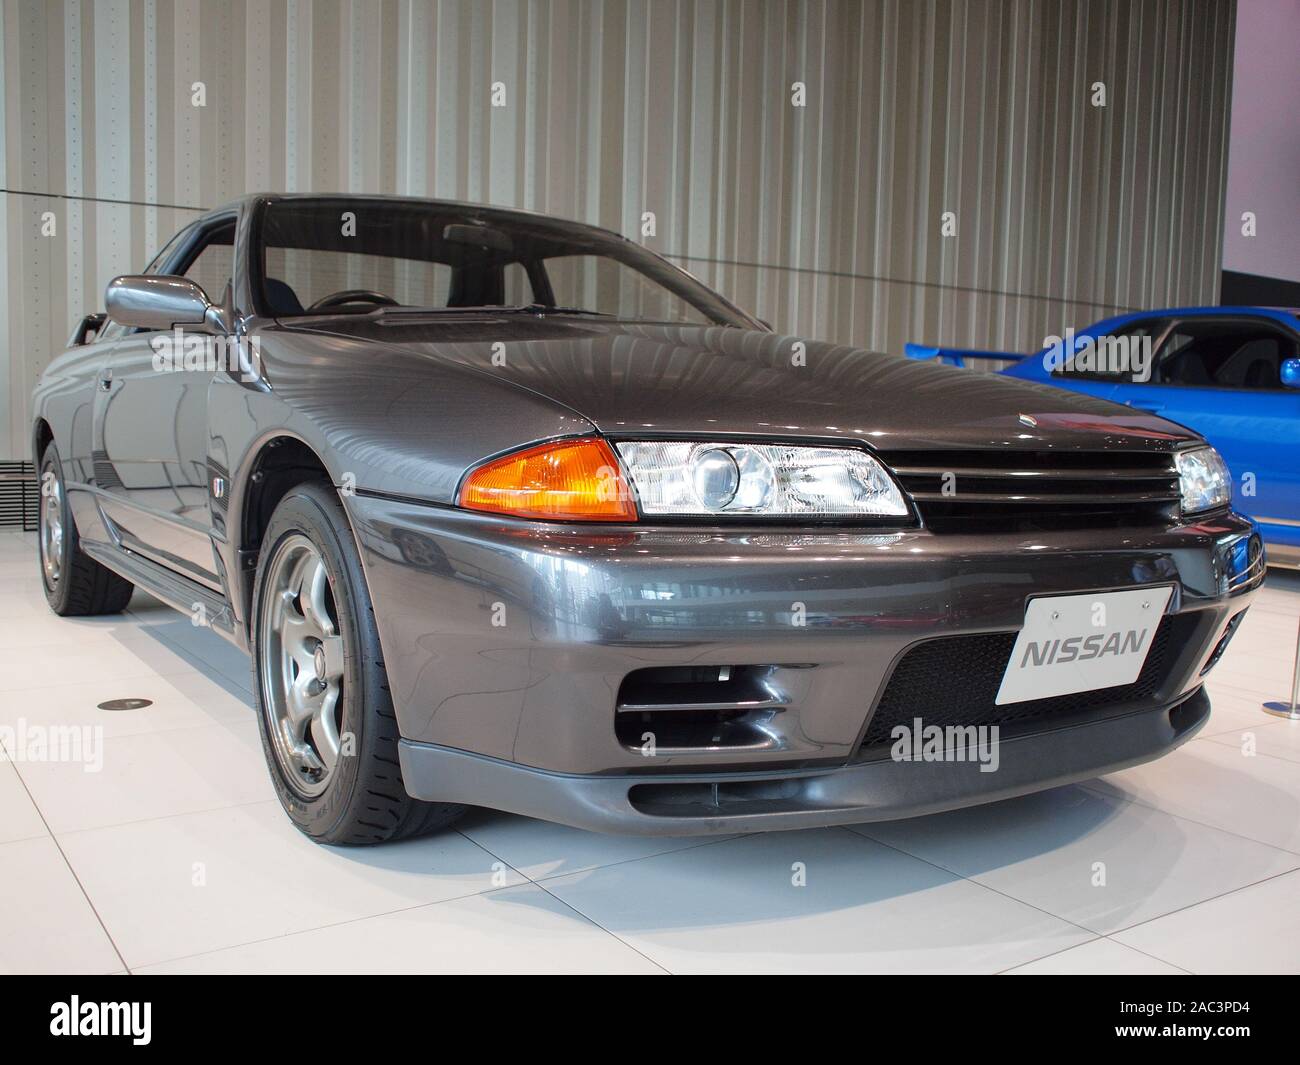 Nissan Skyline Automobile Model High Resolution Stock Photography And Images Alamy